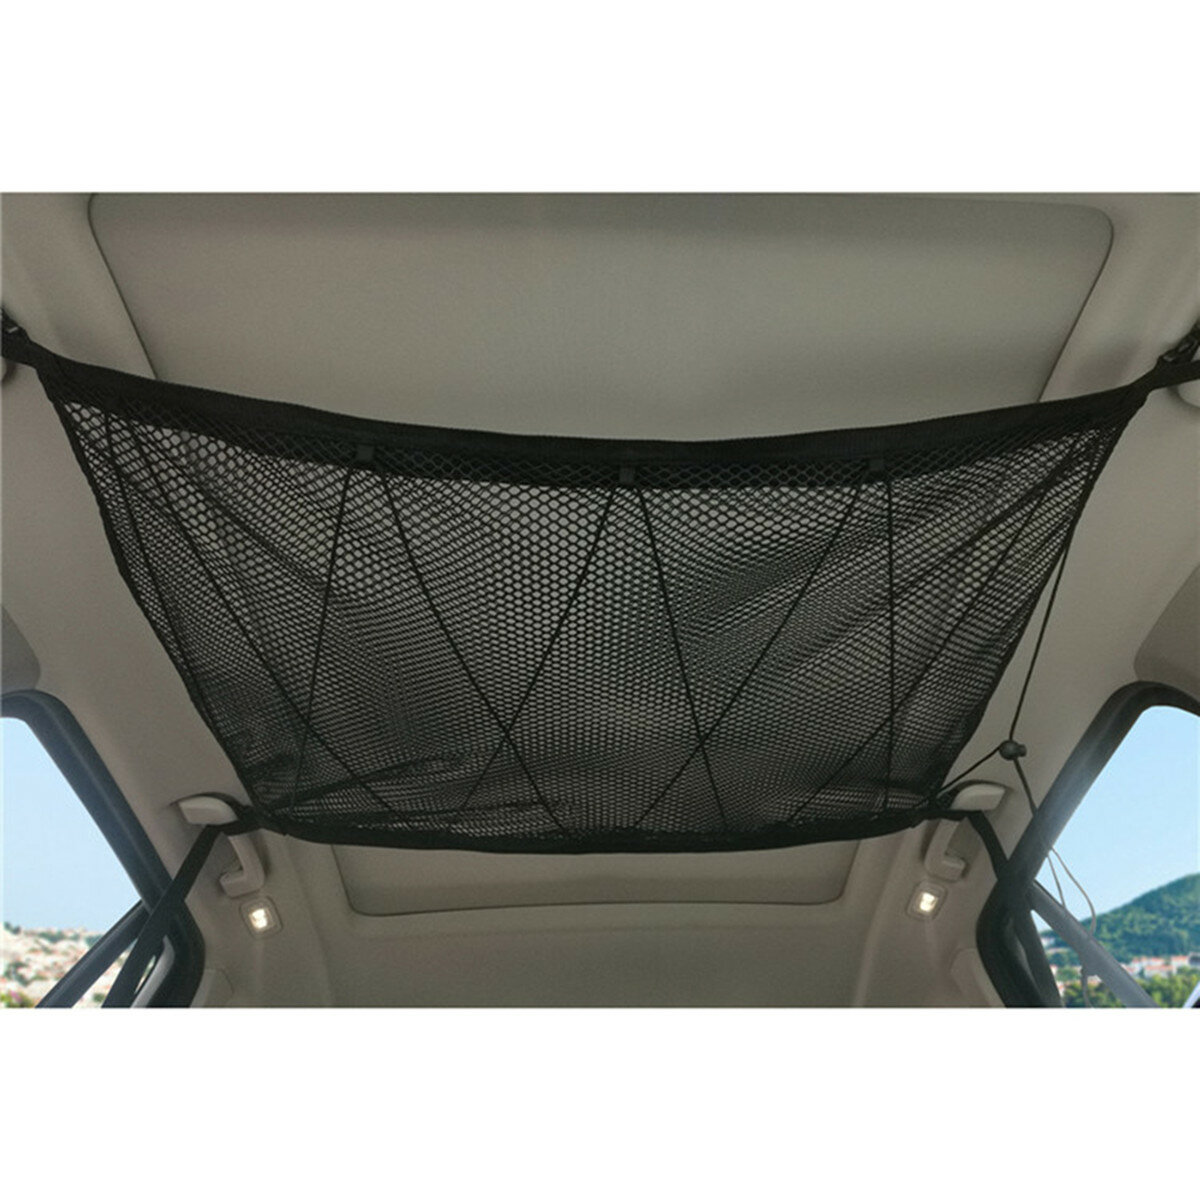 

78x53cm Double-Deck Foldable Car Roof Ceiling Cargo Net Mesh Storage Bag Pockets Pouch Universal For SUV Van